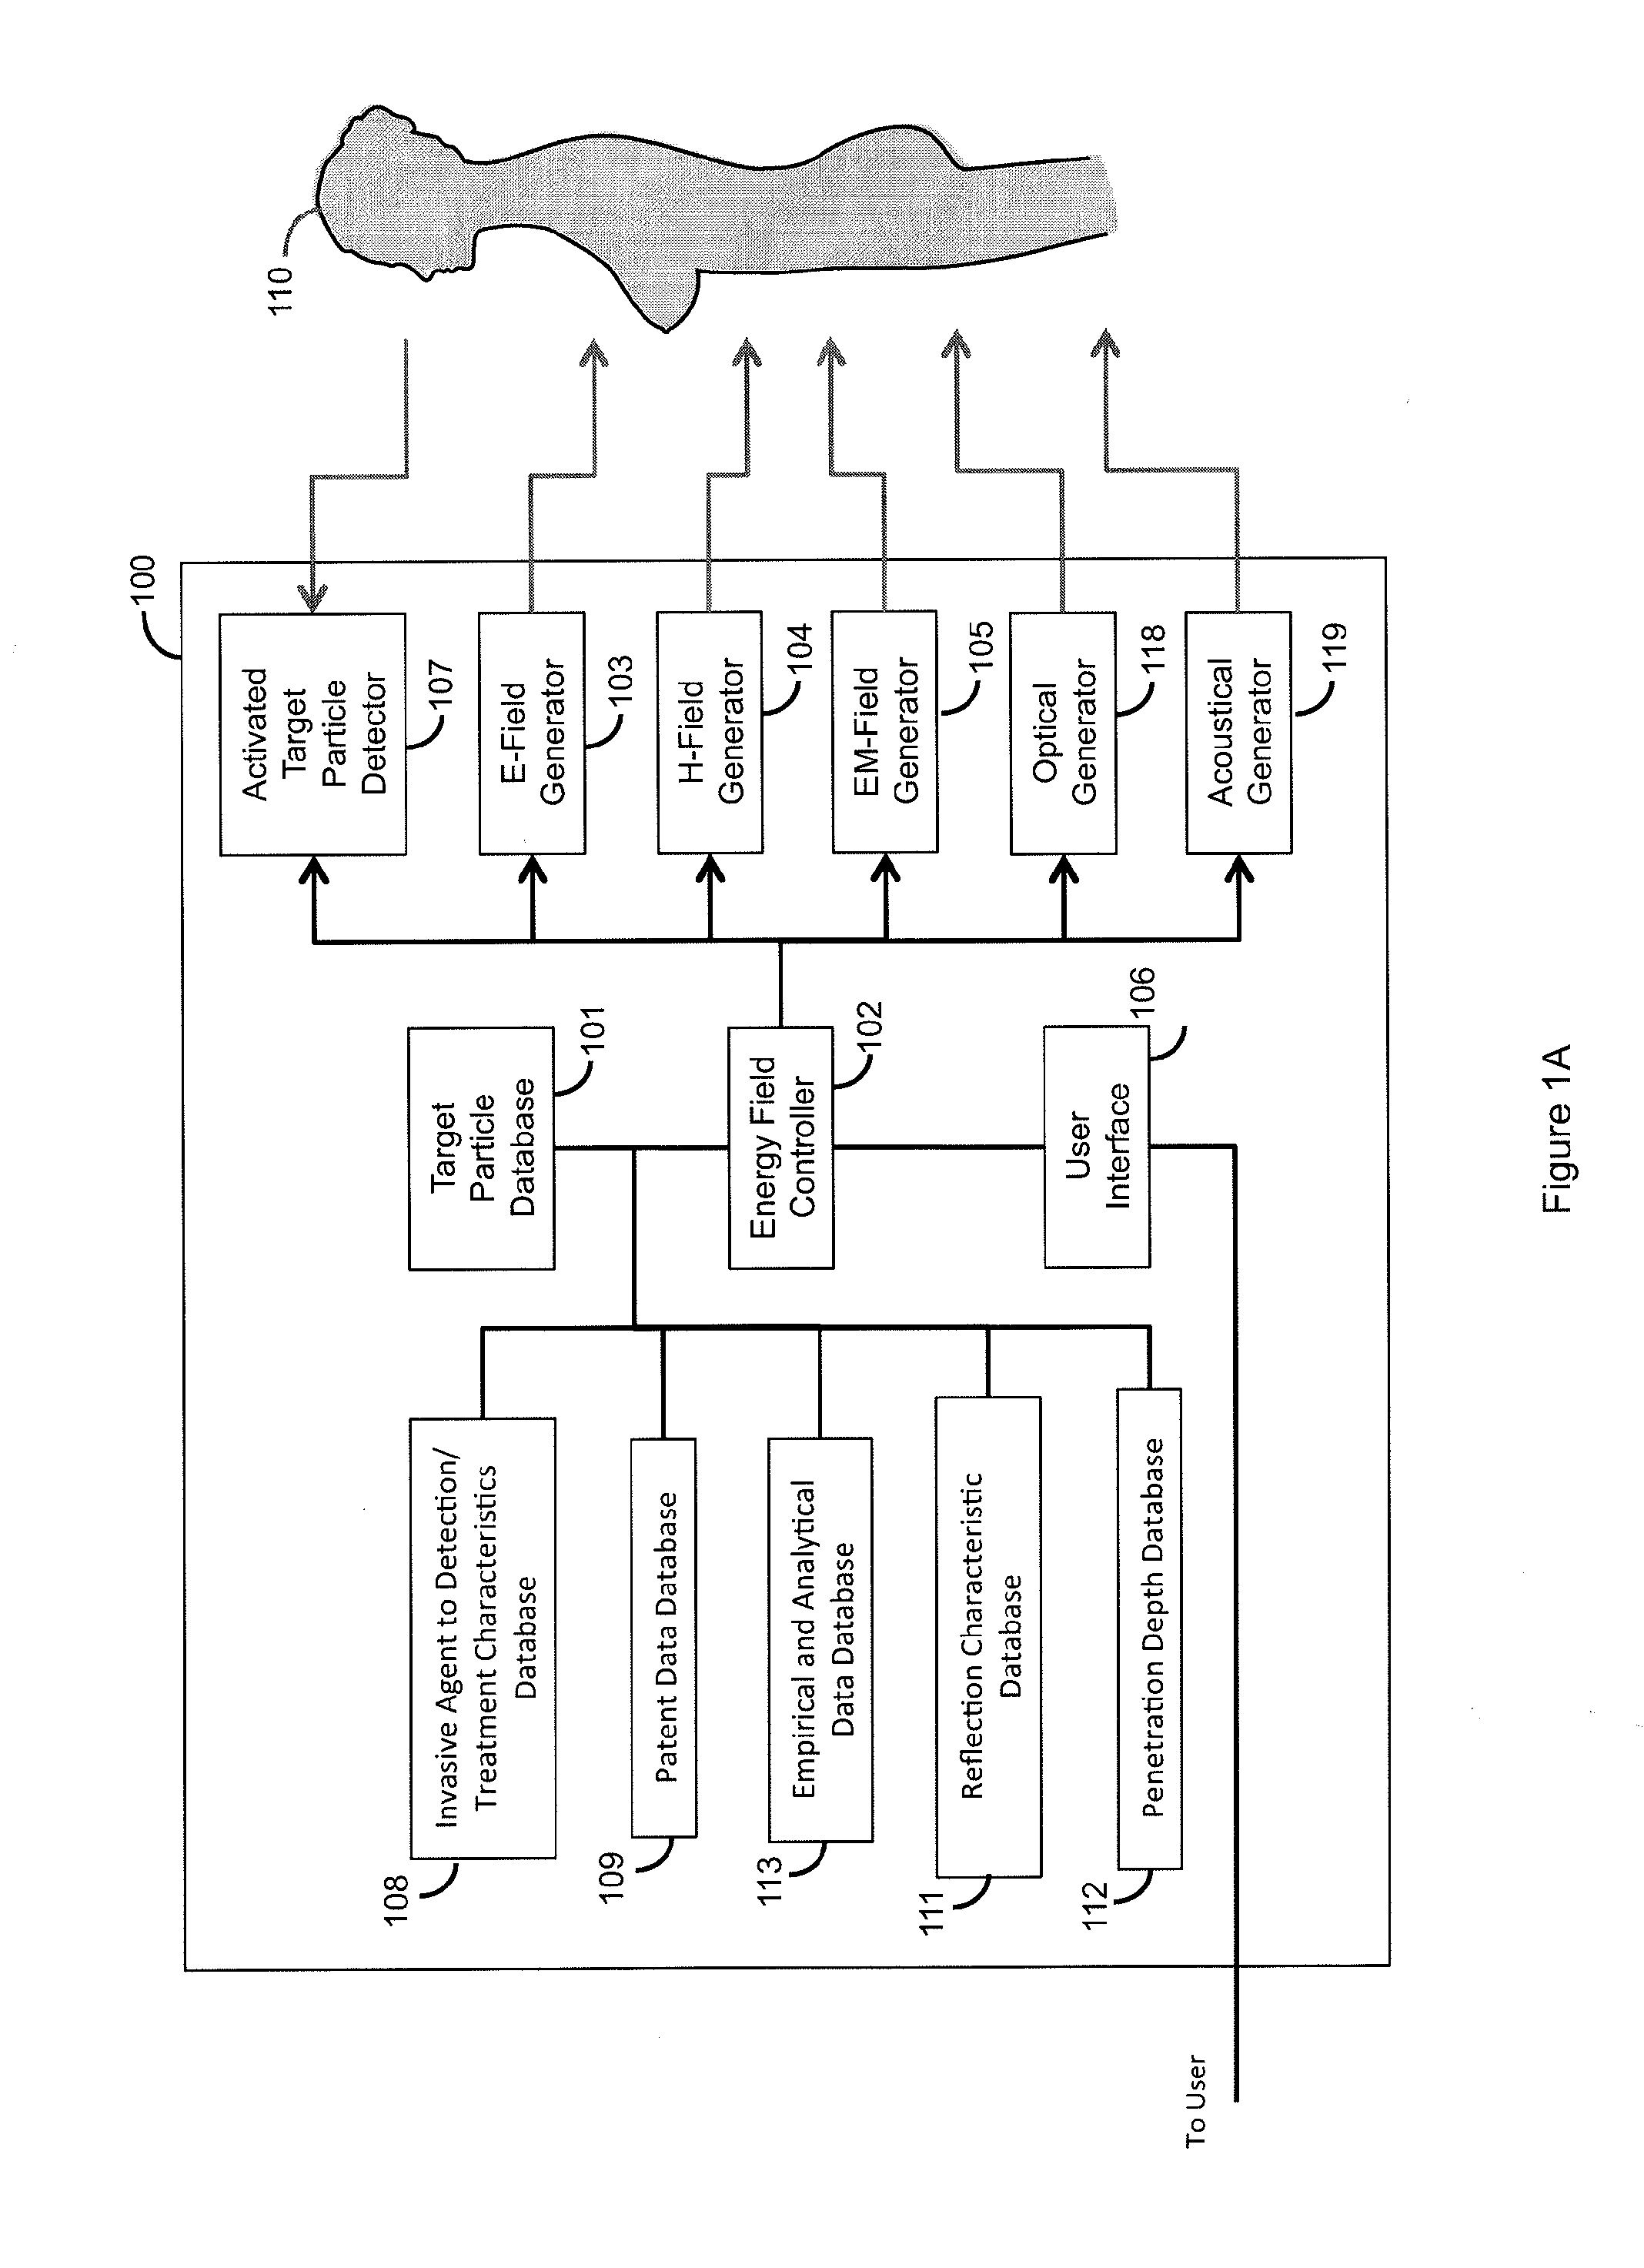 System for automatically amending energy field characteristics in the application of an energy field to a living organism for treatment of invasive agents